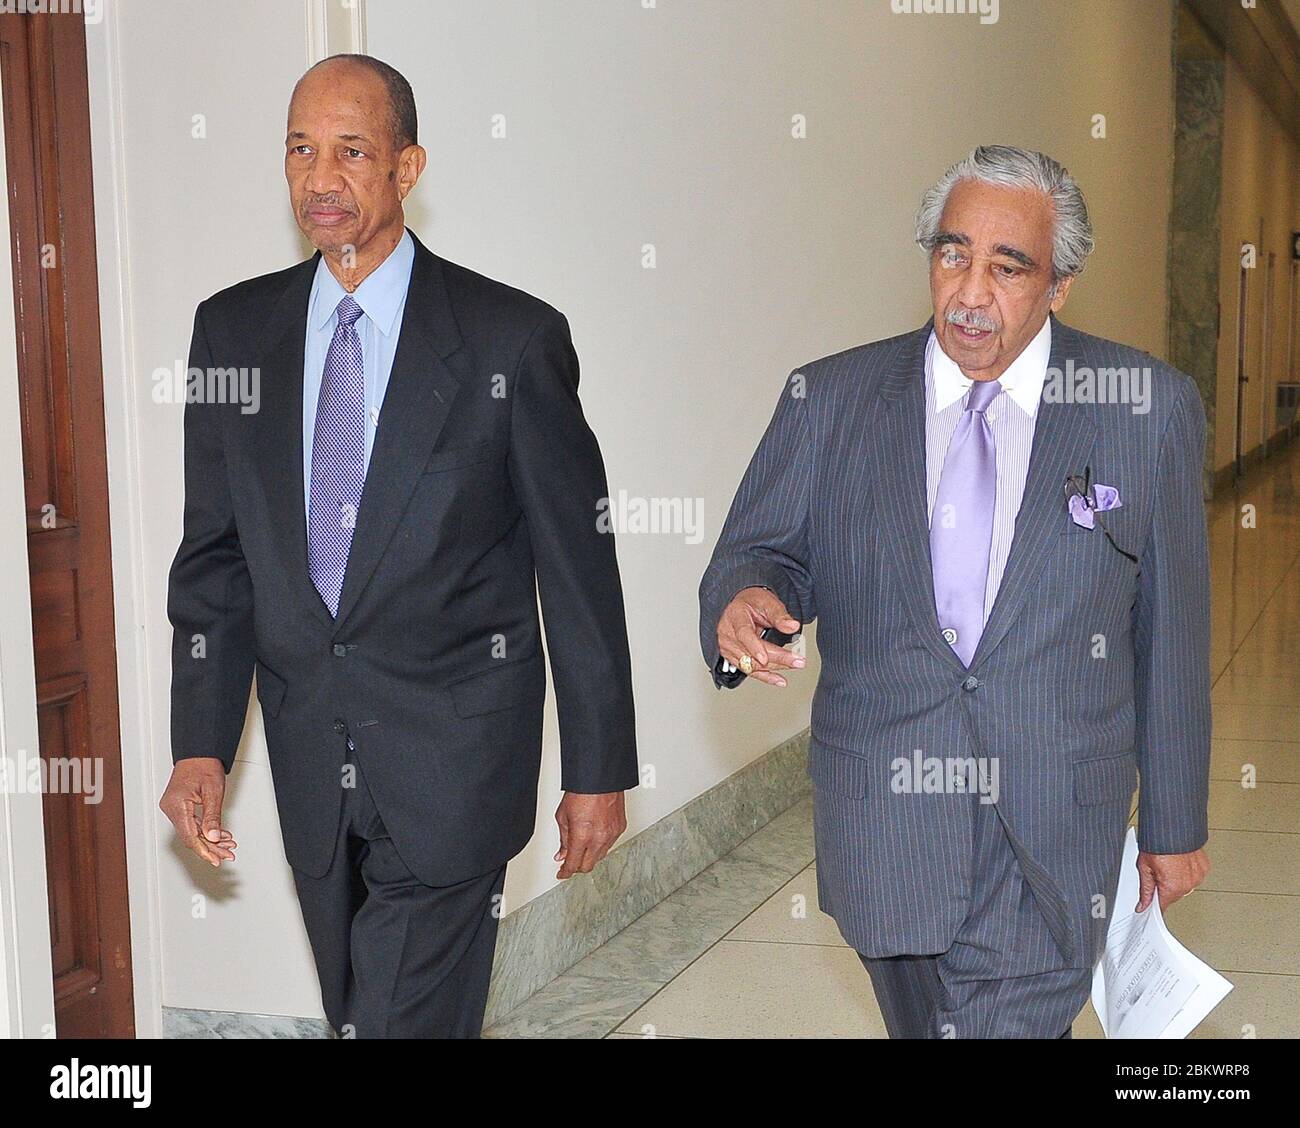 United States Representative Charlie Rangel (Democrat of New York) talks with his Chief of Staff, George Henry, as he departs from his Capitol Hill office on Tuesday, November 30, 2010.Credit: Ron Sachs / CNP  (RESTRICTION: NO New York or New Jersey Newspapers or newspapers within a 75 mile radius of New York City) / MediaPunch Stock Photo